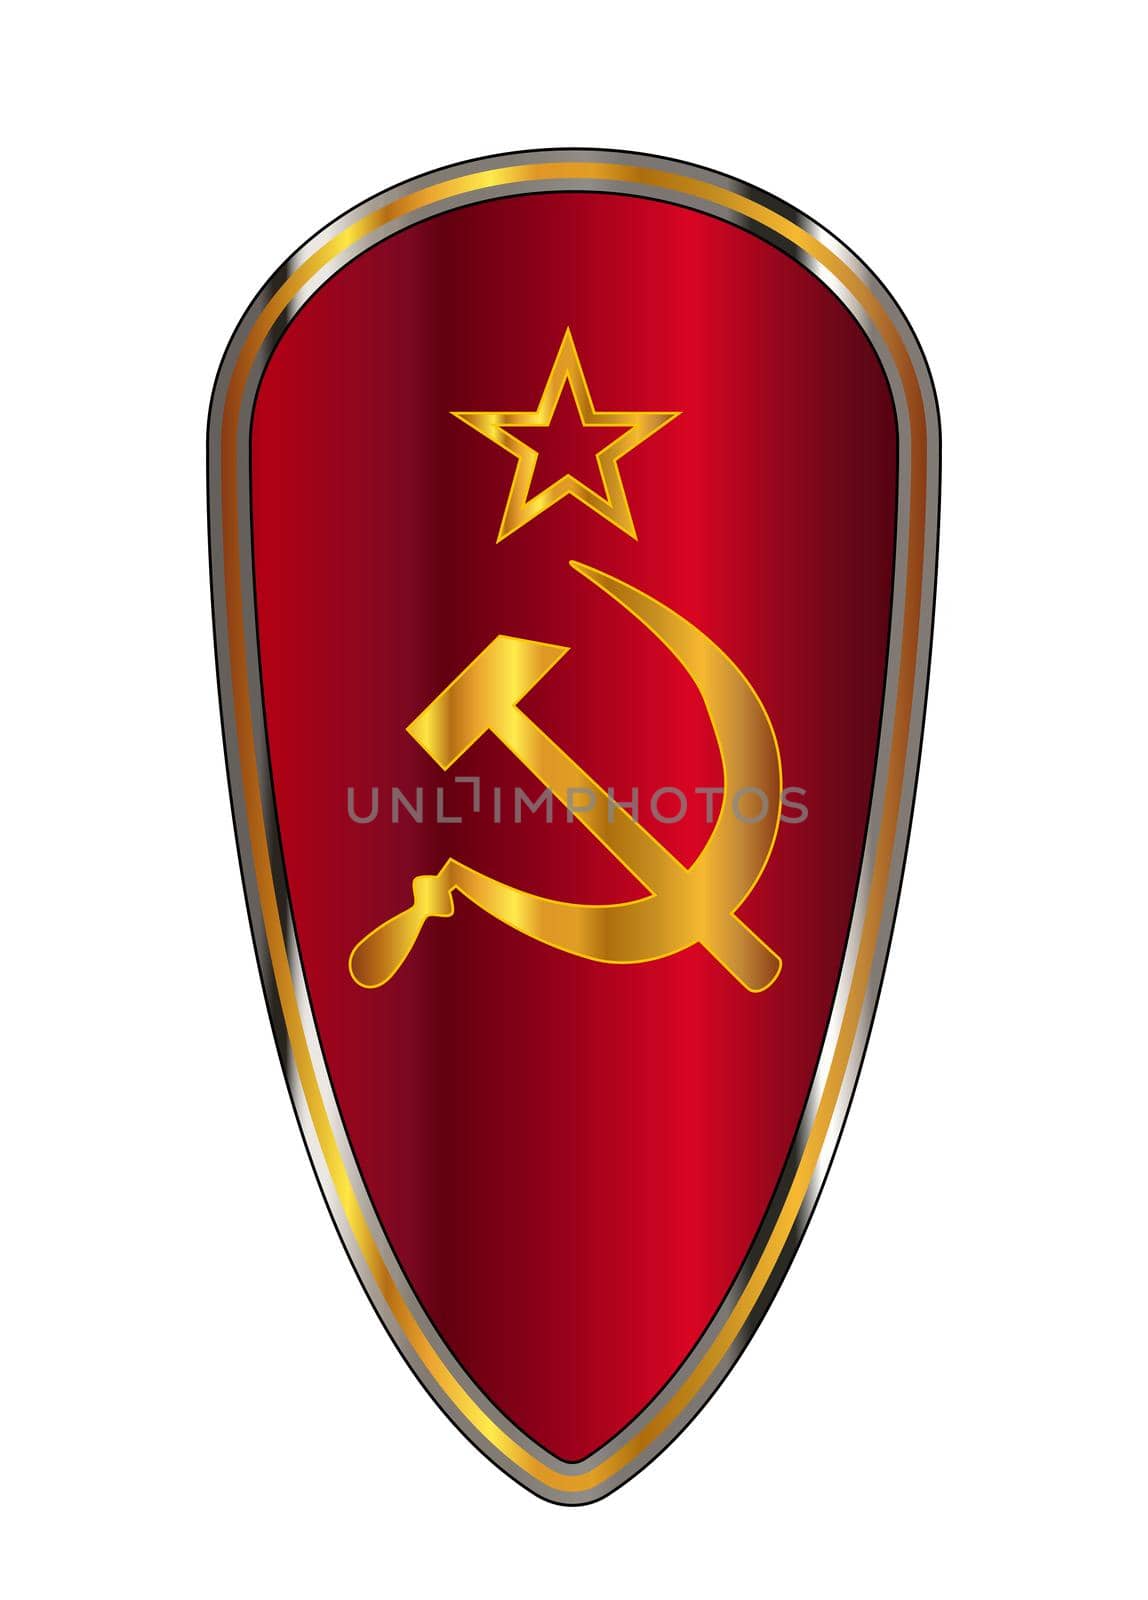 The traditional knights shield associated with a crusader with the hammer and sickle emblem of the Soviet Union